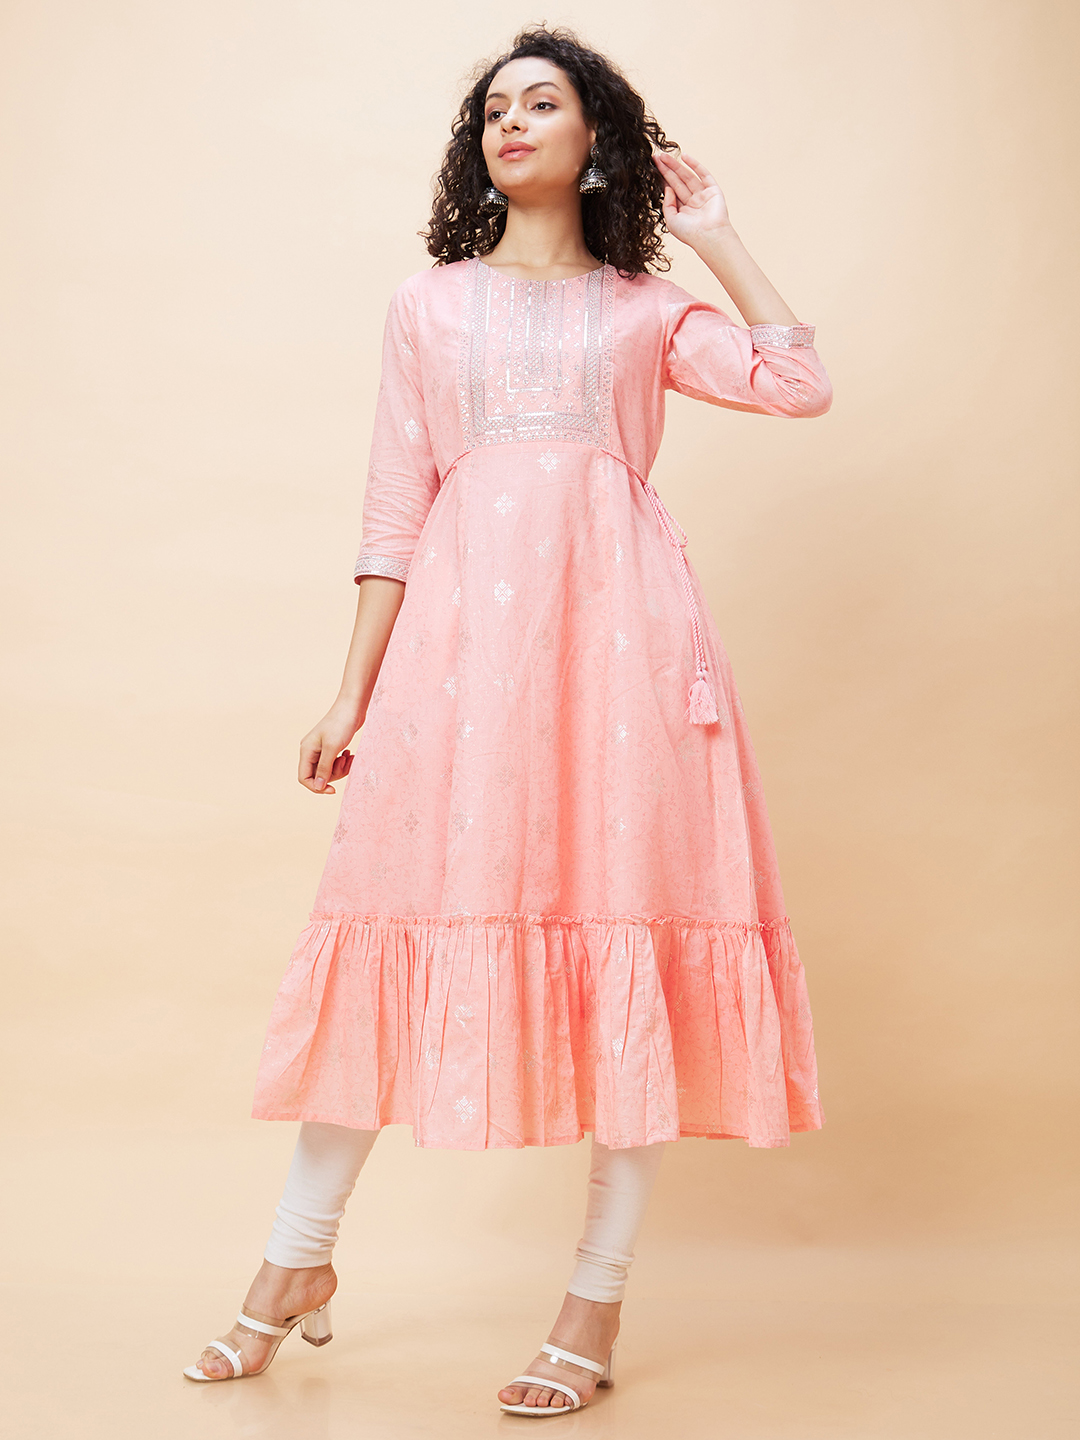 Globus Women Peach Ethnic Motifs Print Round Neck Flared Tiered A-Line Festive Kurta with Yoke Sequinned and Tie Up Details